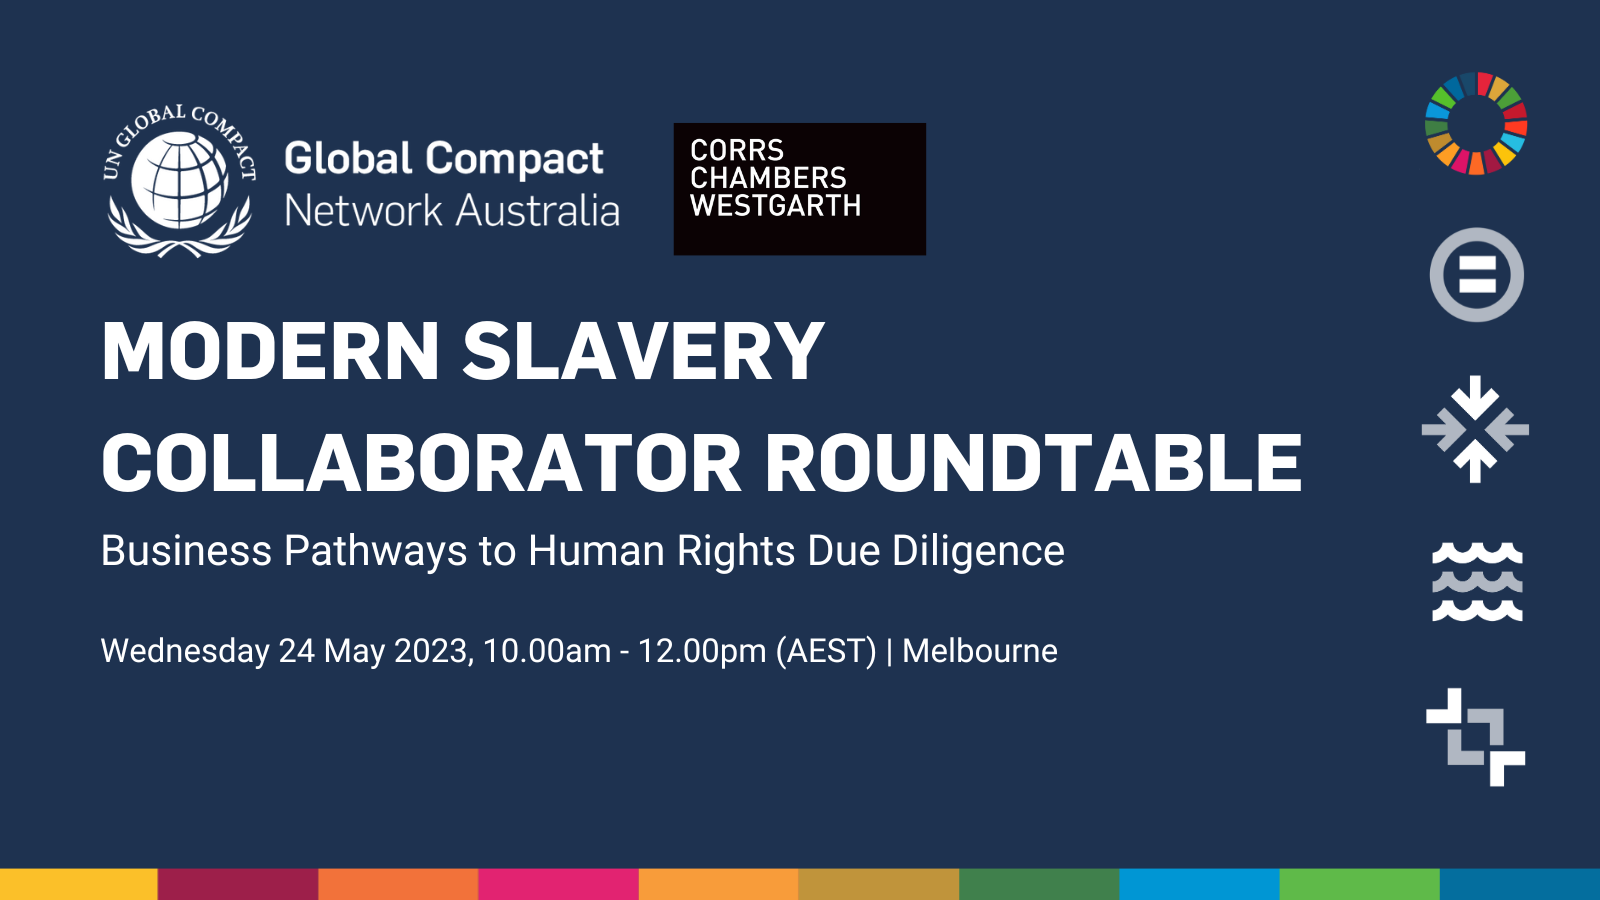 Modern Slavery Collaborator Roundtable: Business Pathways to Human Rights Due Diligence